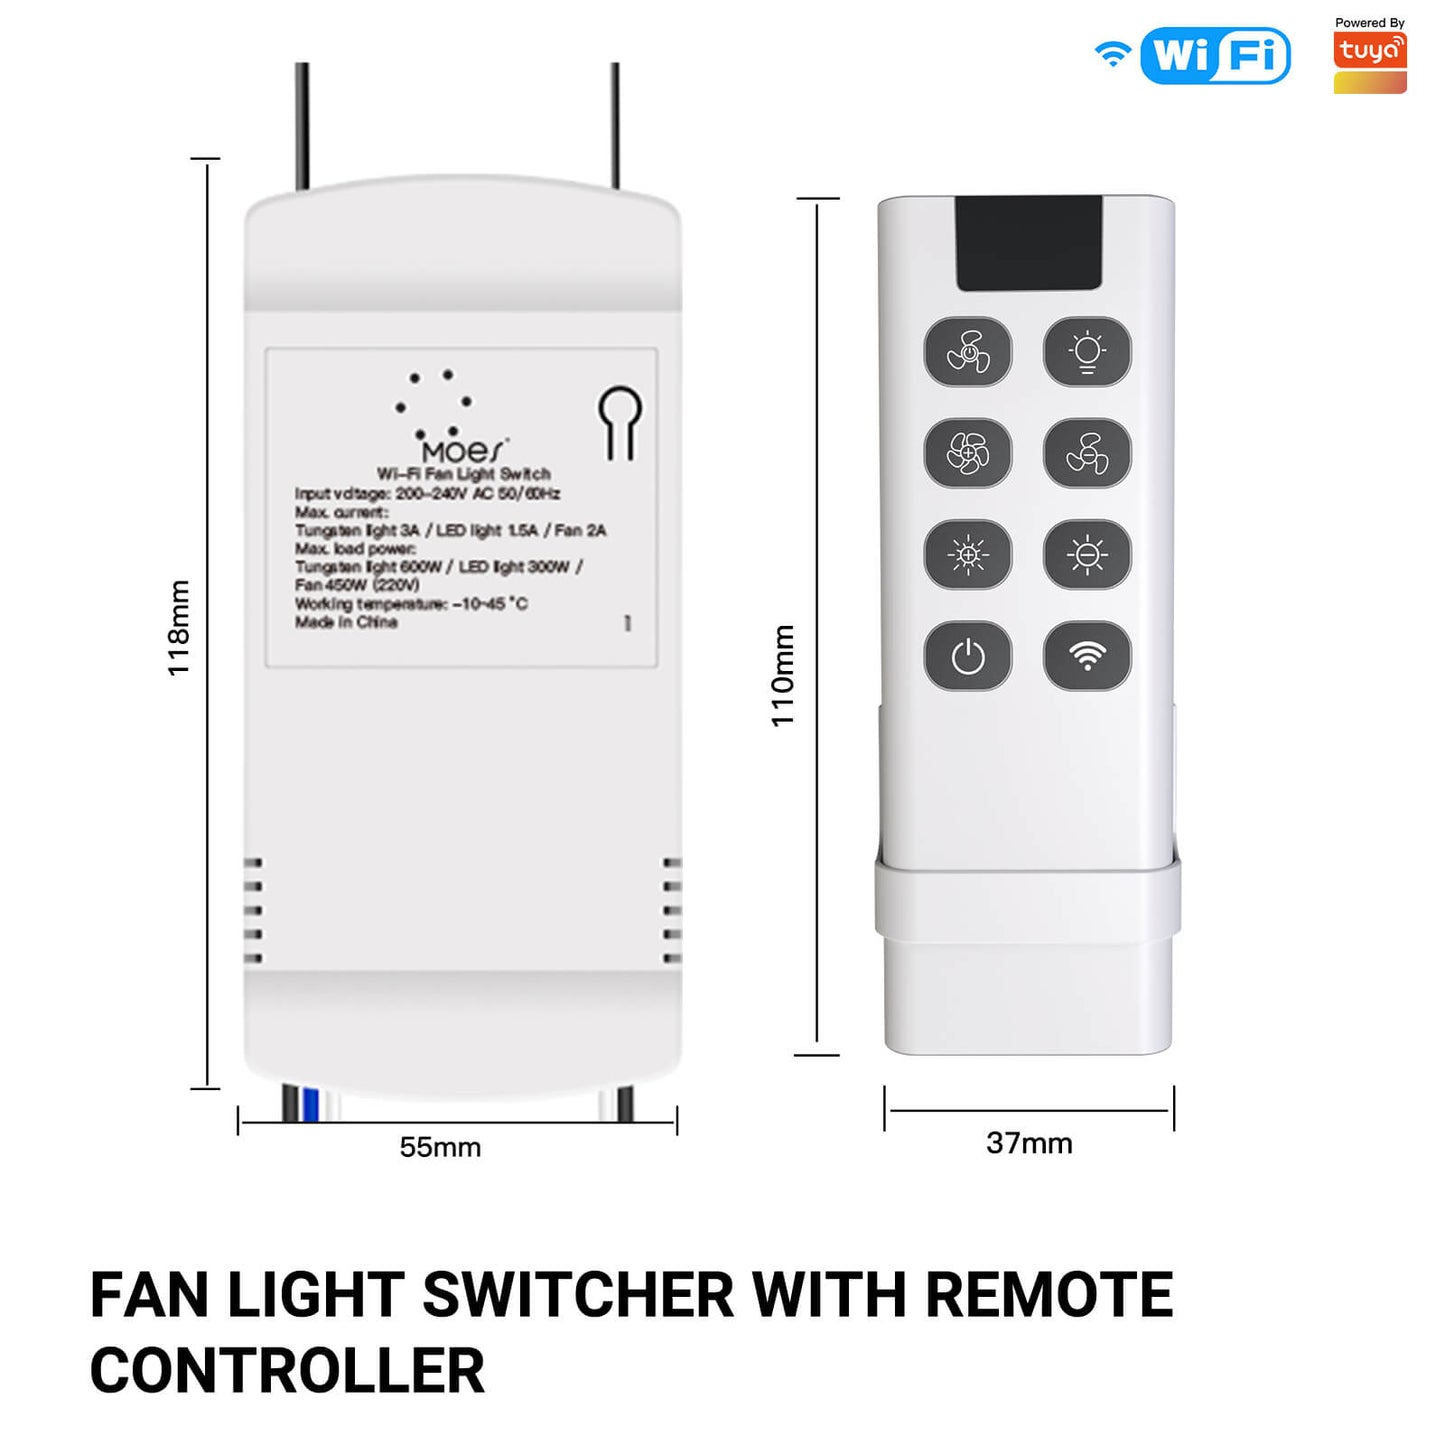 fan light switcher with remote controller - MOES